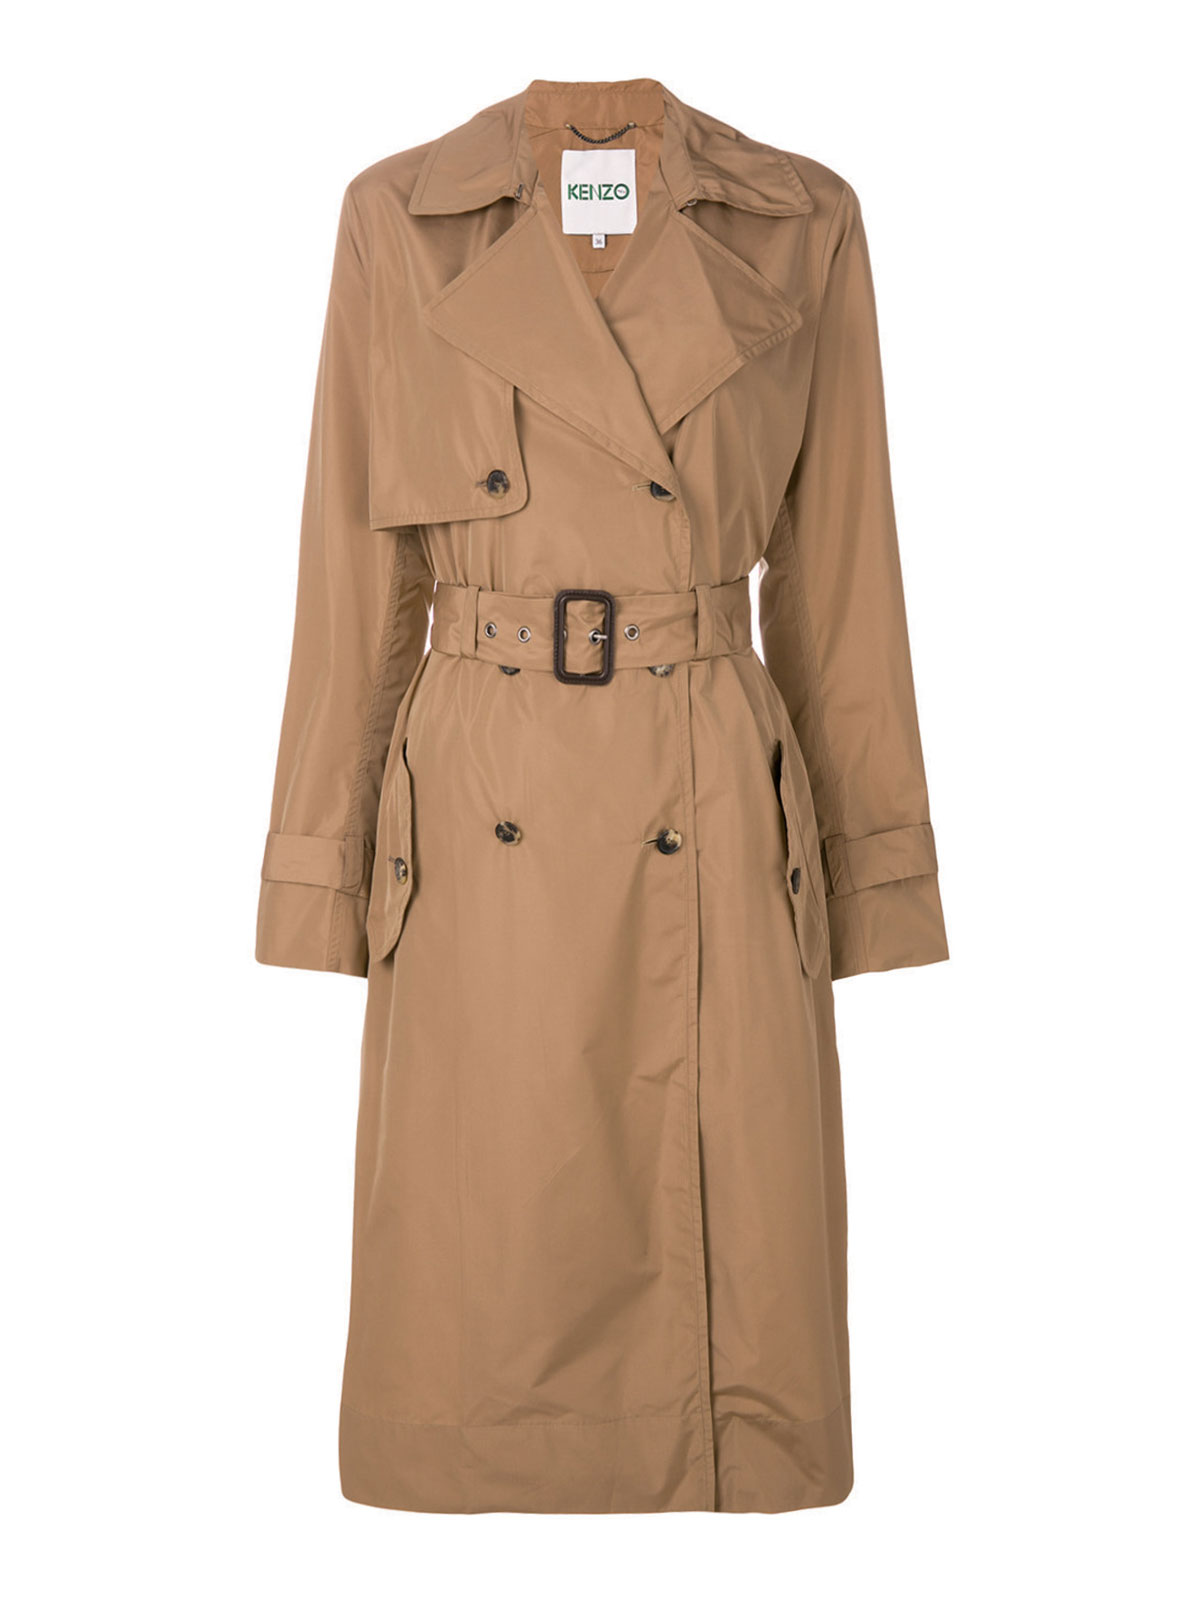 Kenzo - Technical fabric classic trench 